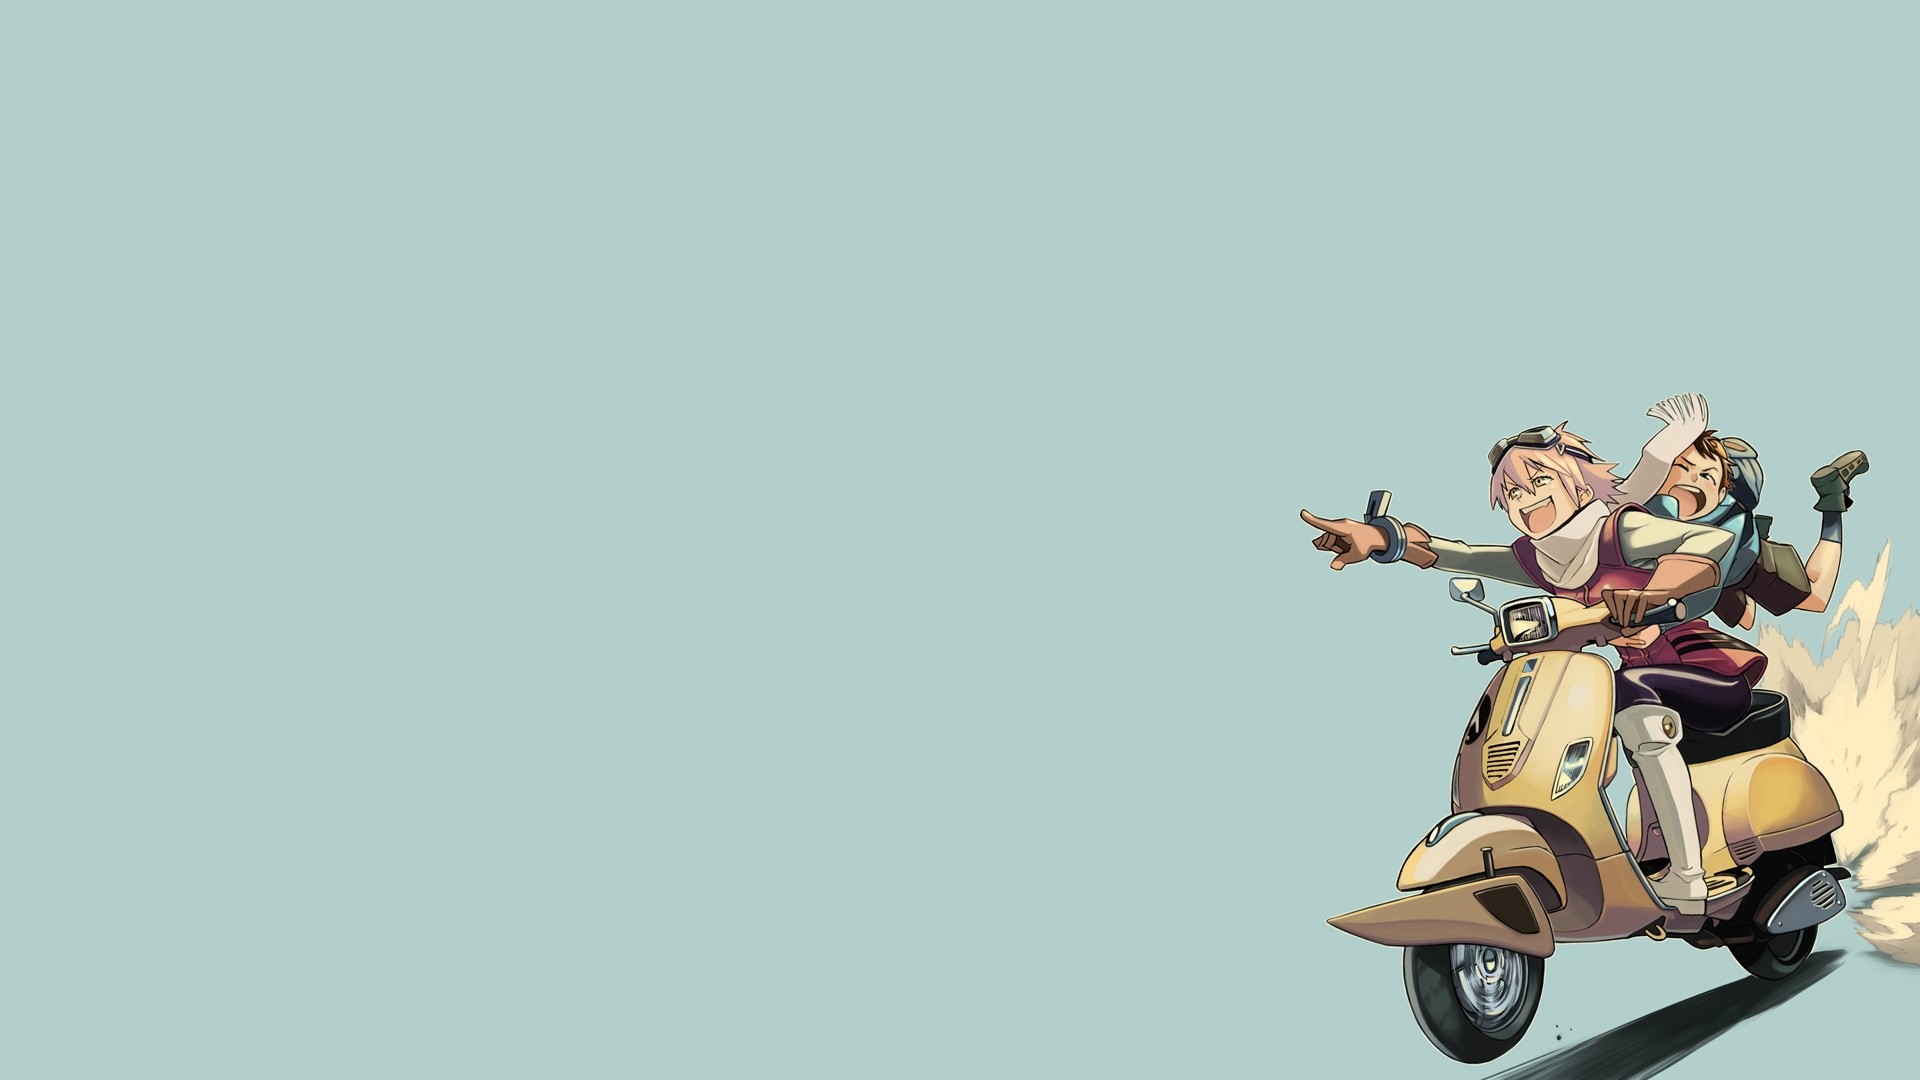 Anime 1920x1080 anime simple background vehicle minimalism FLCL scooters women with scooters two women anime girls